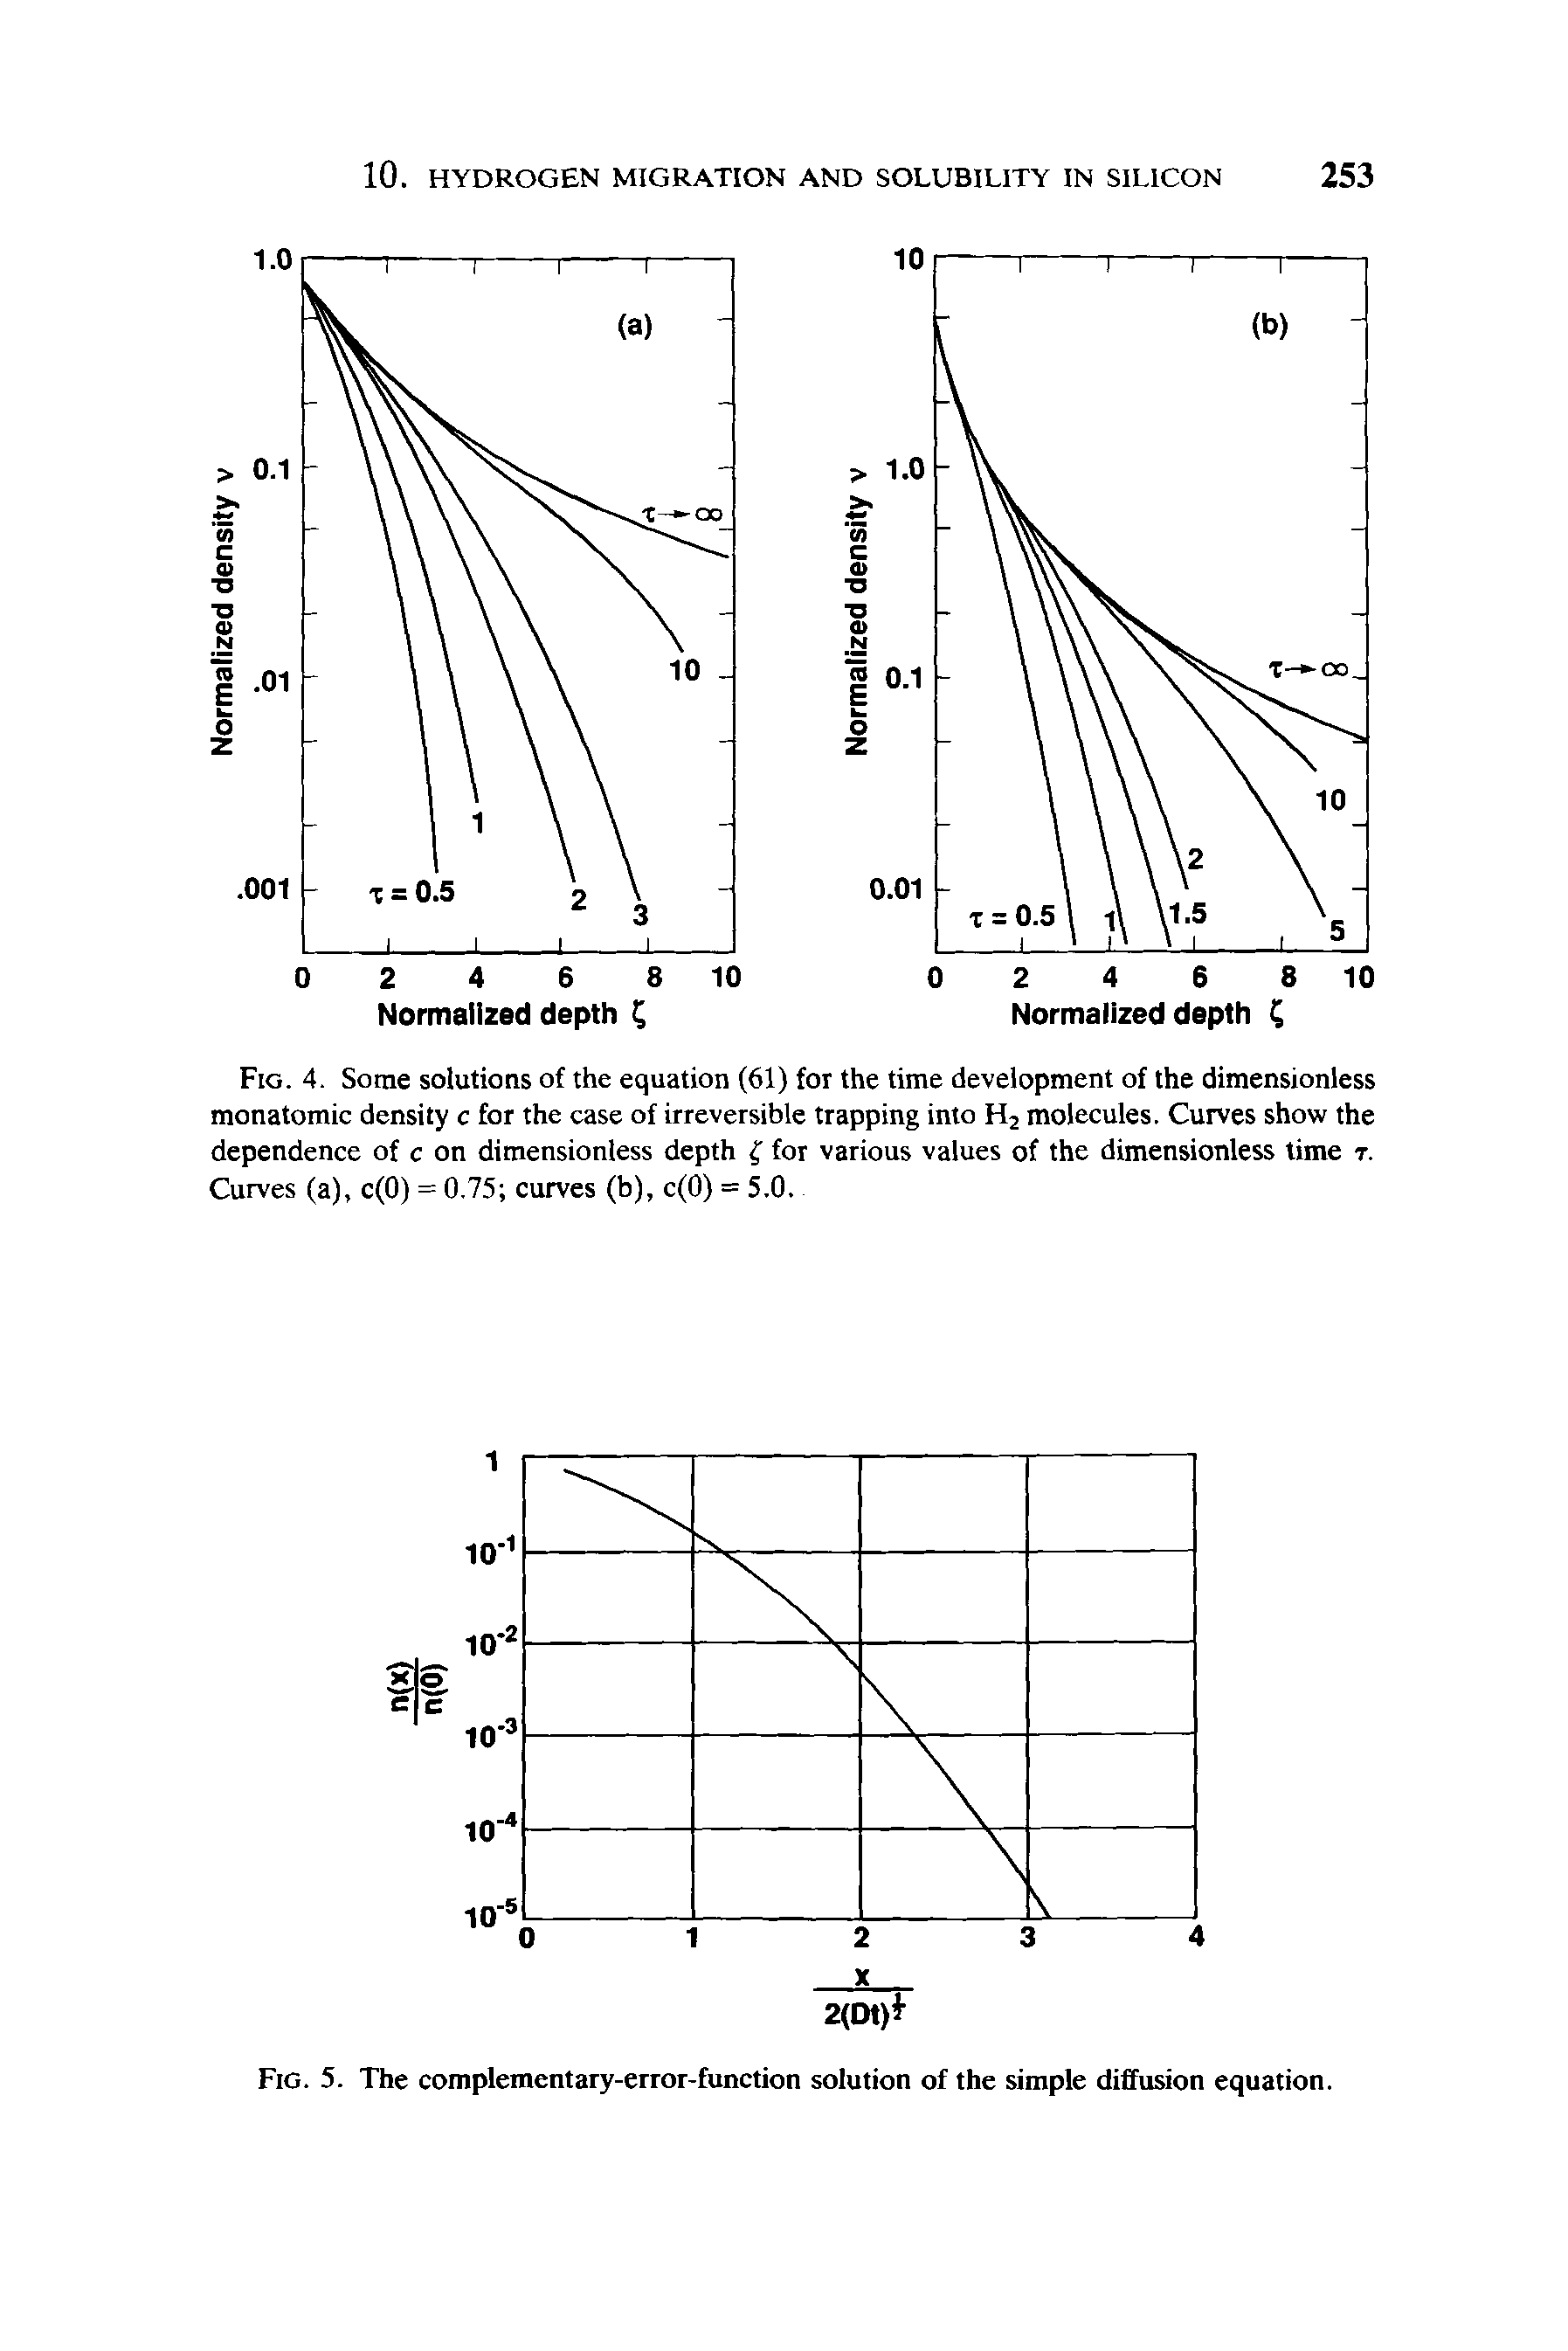 Fig. 5. The complementary-error-function solution of the simple diffusion equation.